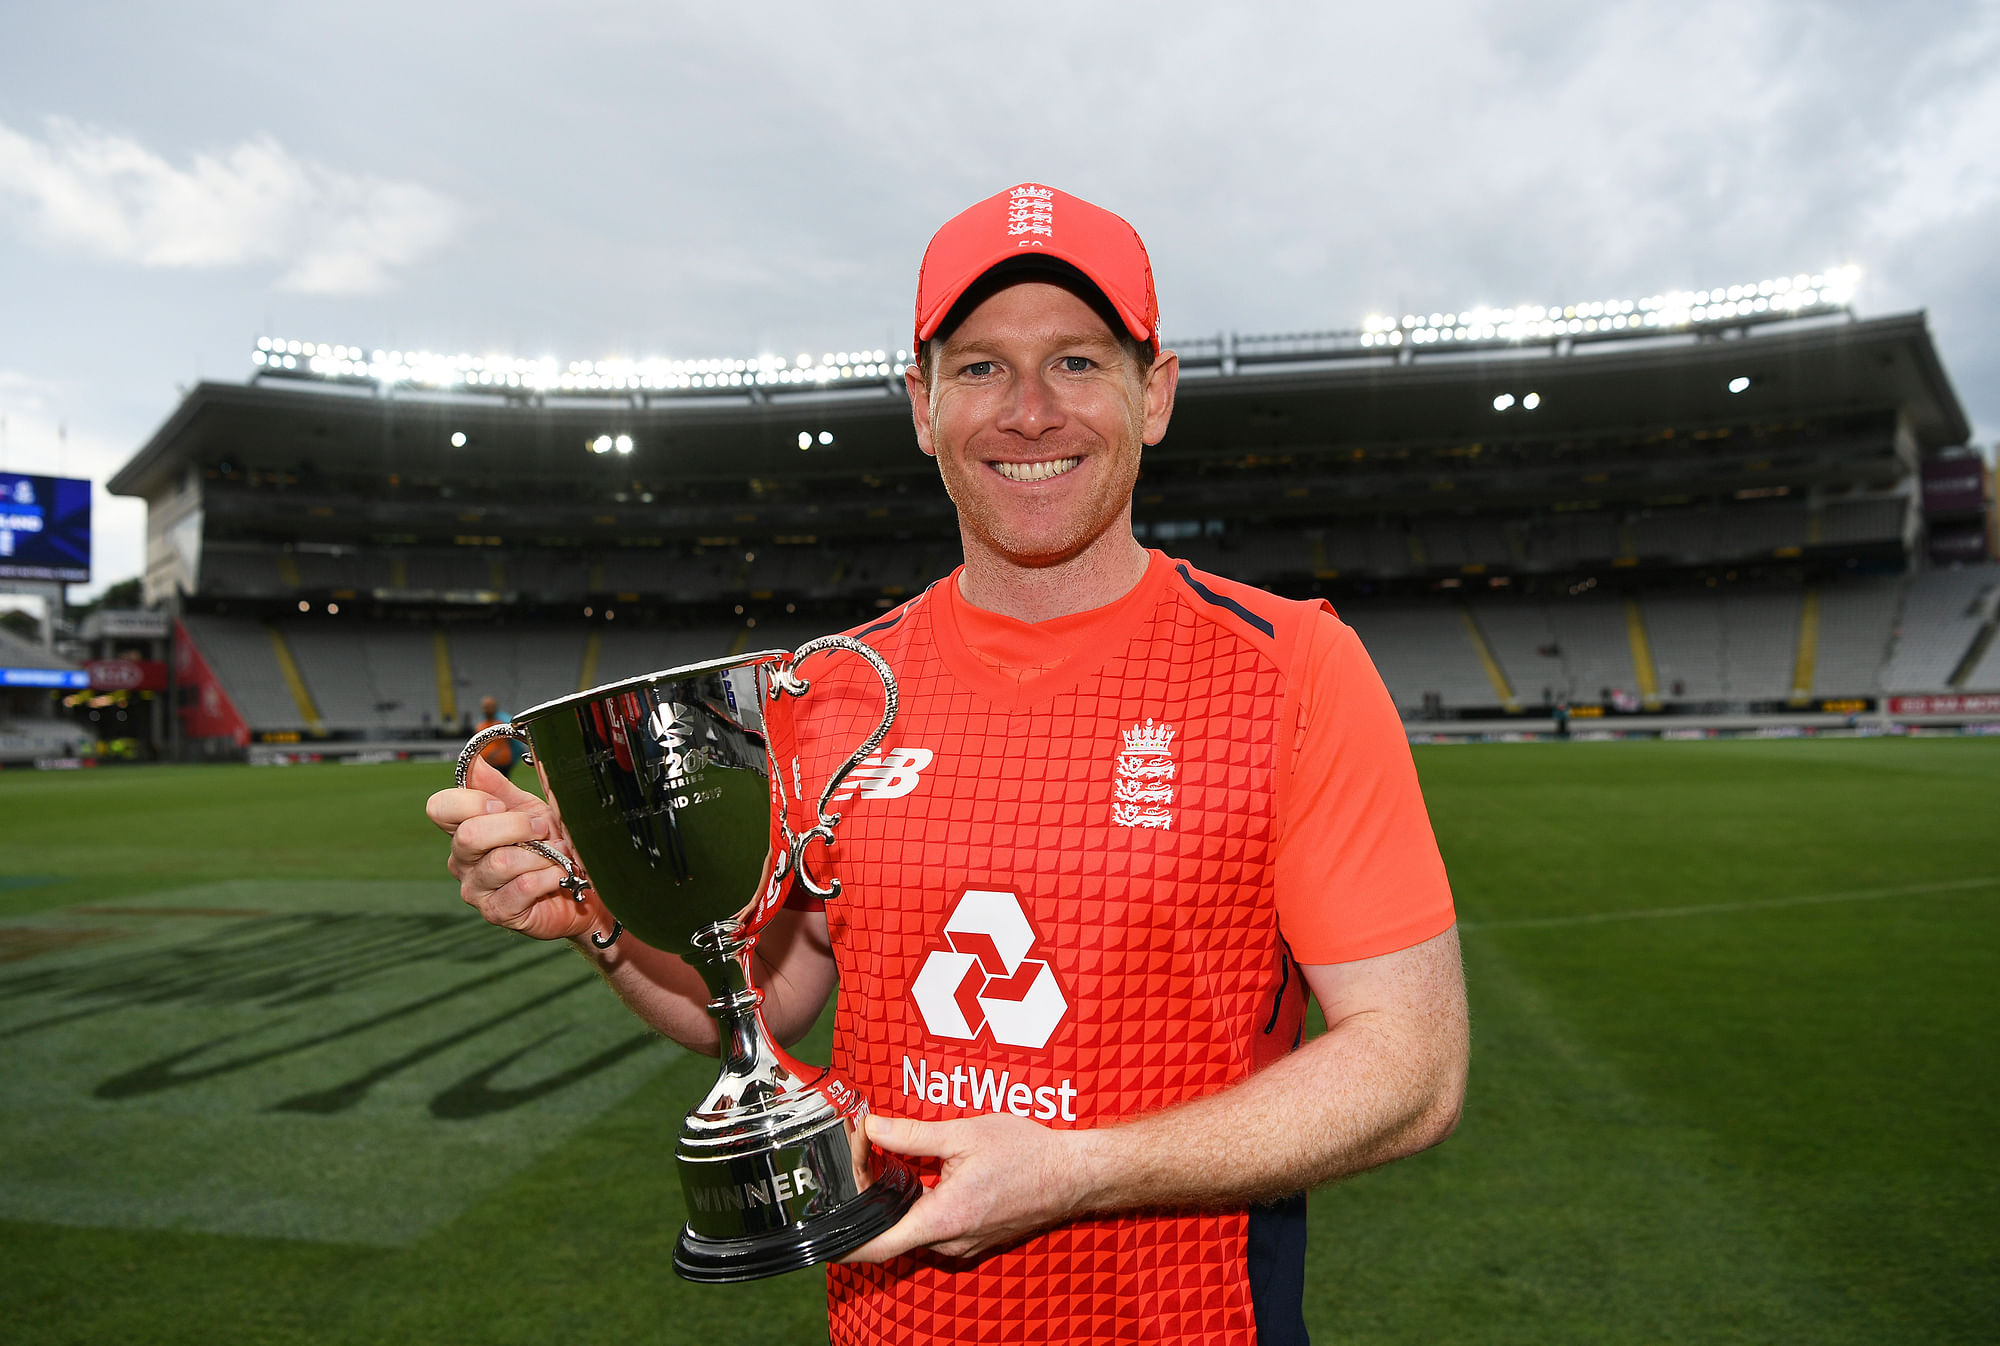 Eoin Morgan is one of the big names who is likely to be a favourite among the franchises in the IPL auction.